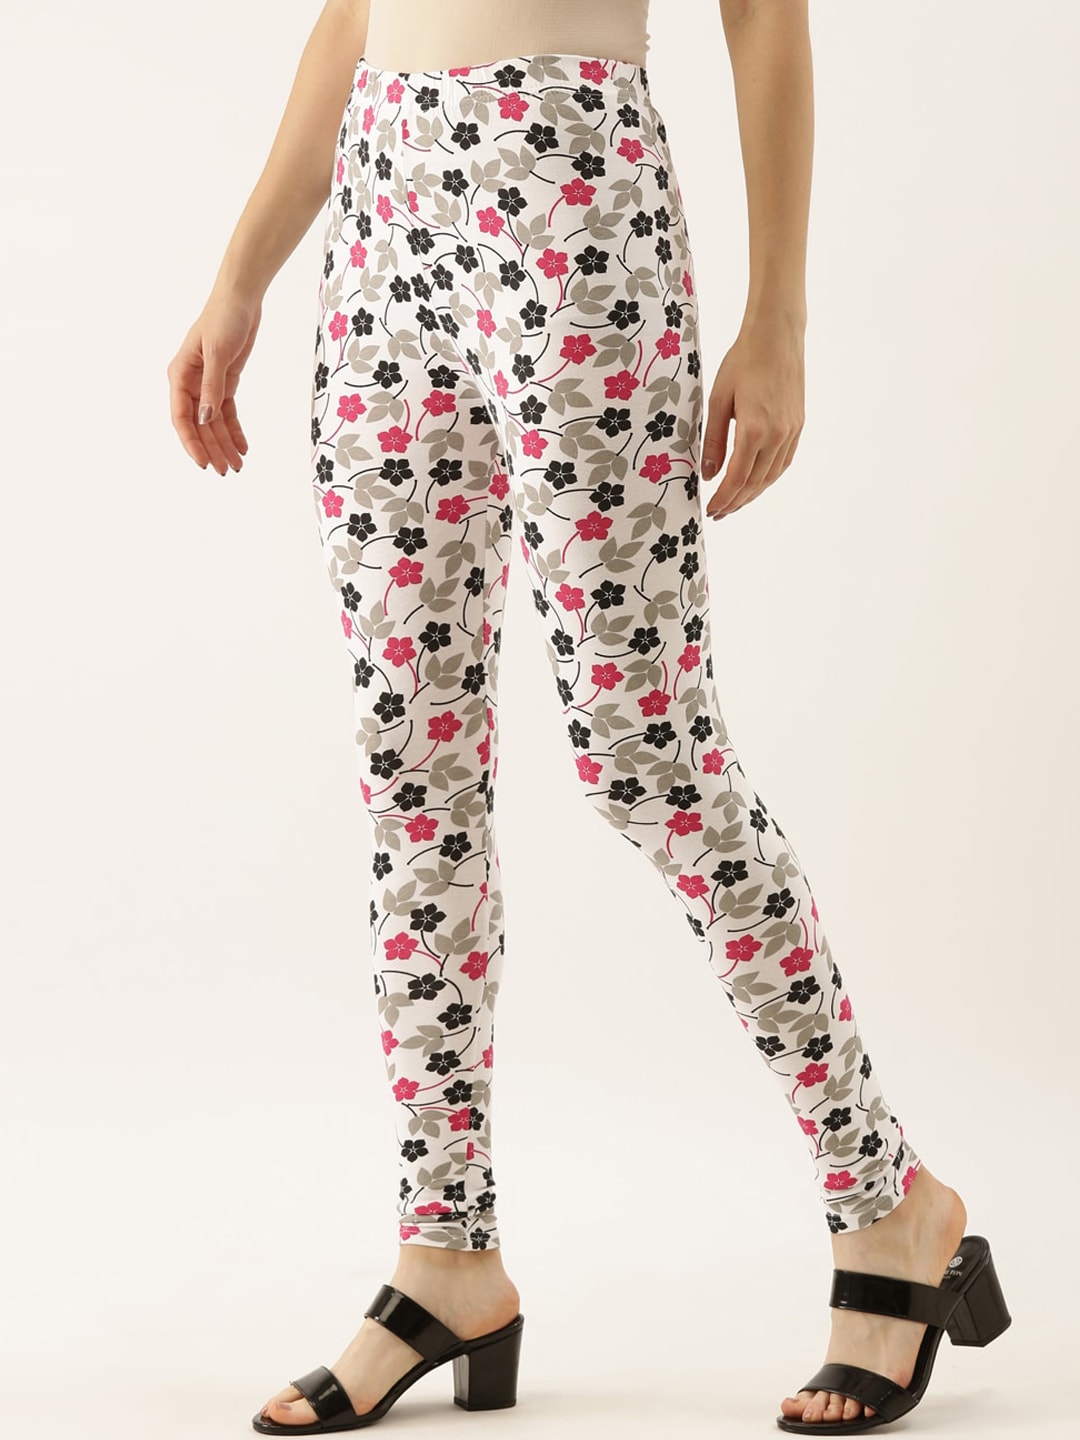 Souchii White & Pink Printed Slim-Fit Ankle-Length Leggings